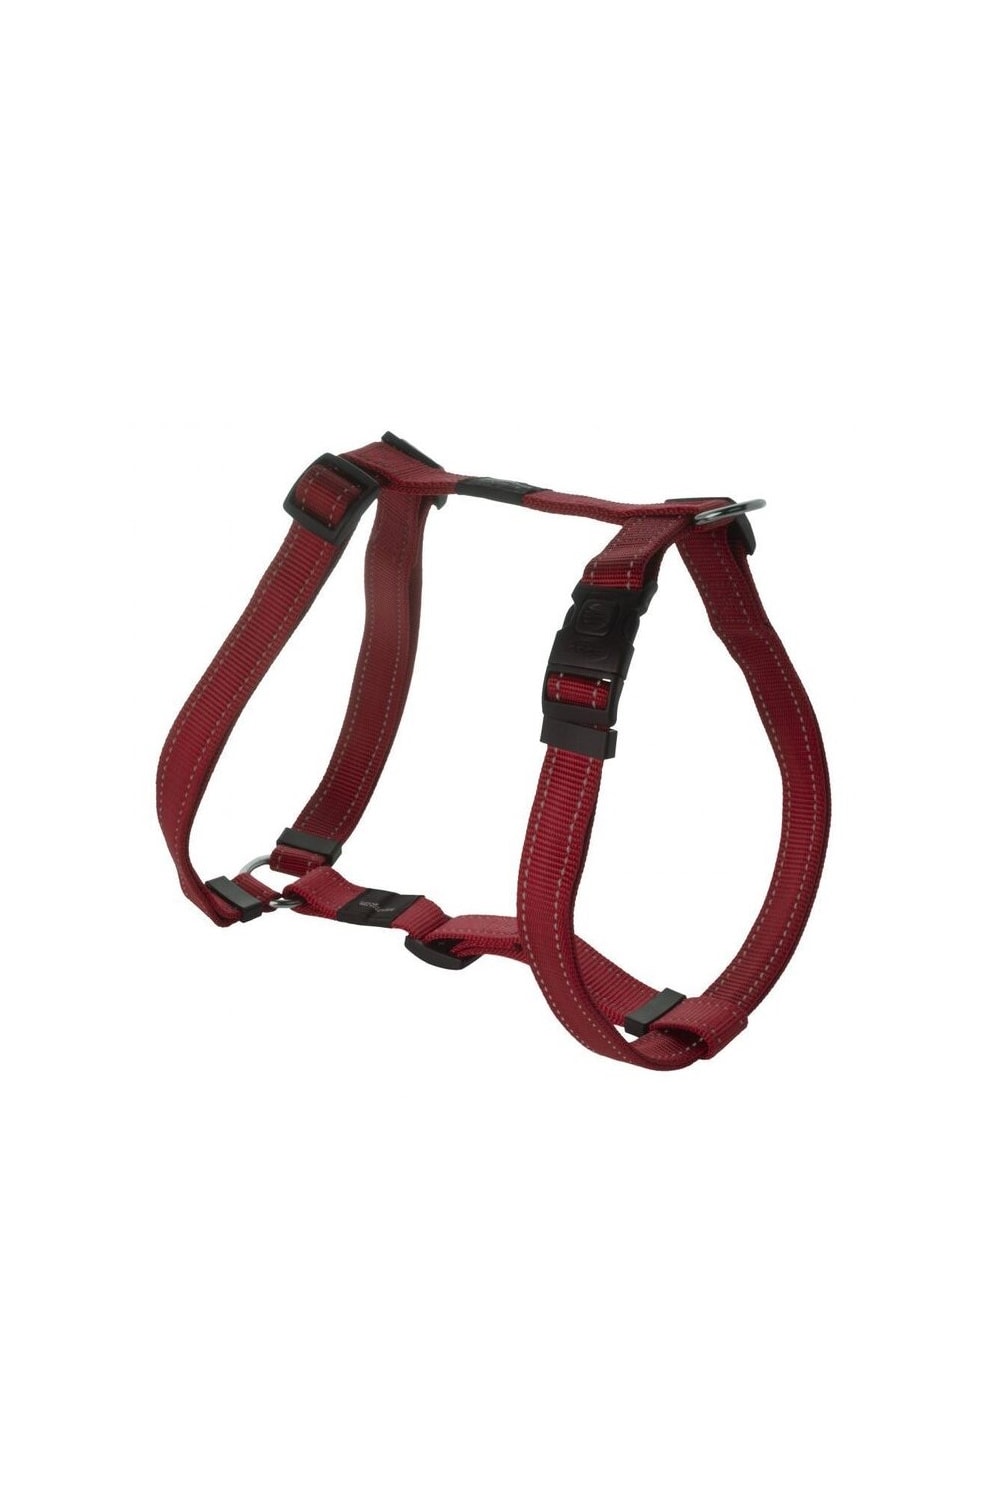 Rogz Utility Dog Harness (Red) (23.62in - 39.37in)